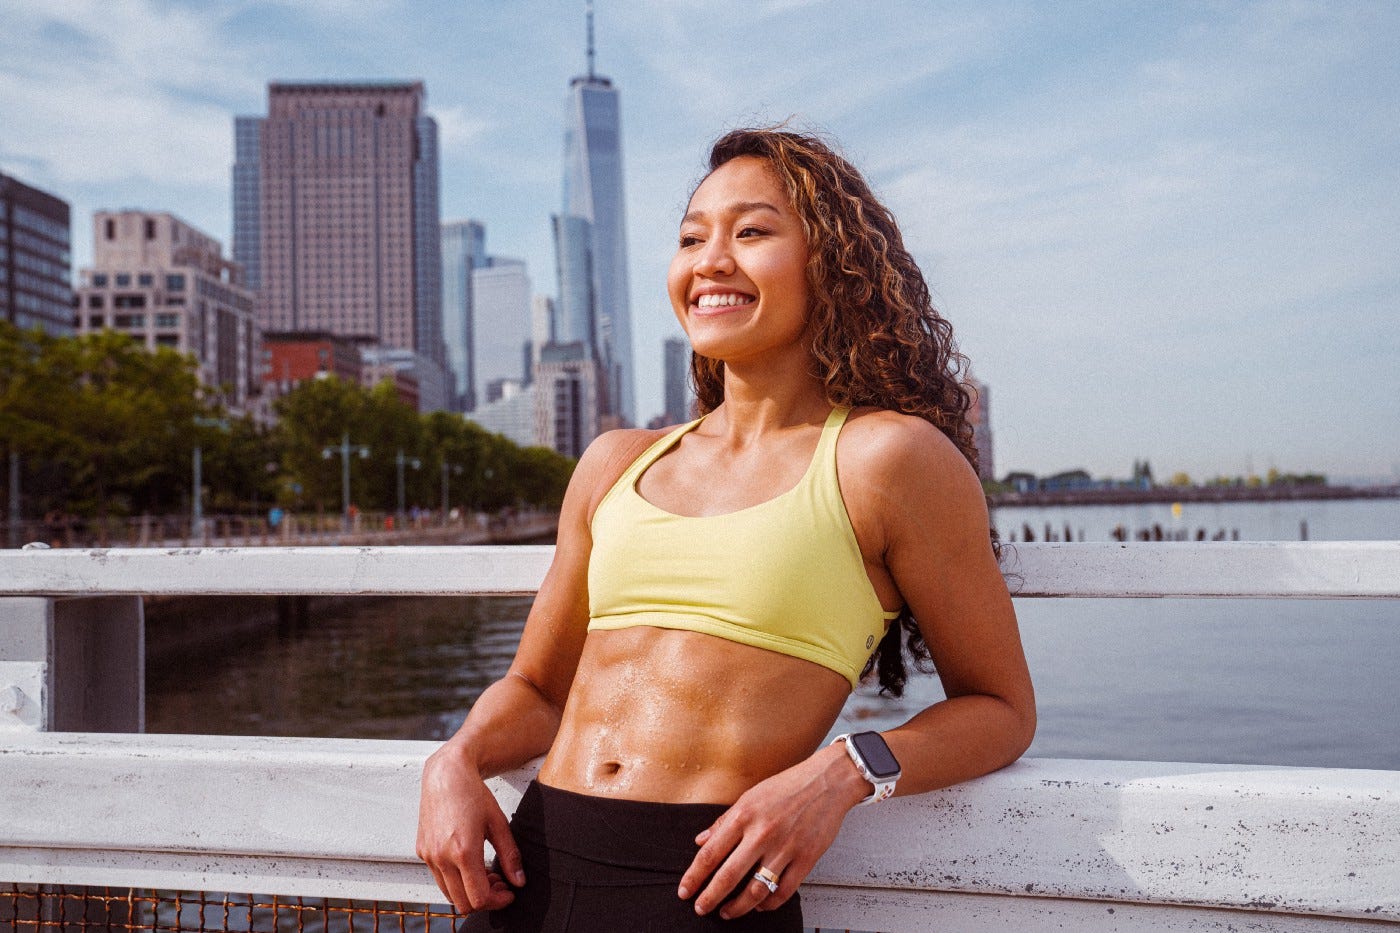 Ripped smiling fit lady in the backdrop of a bridge